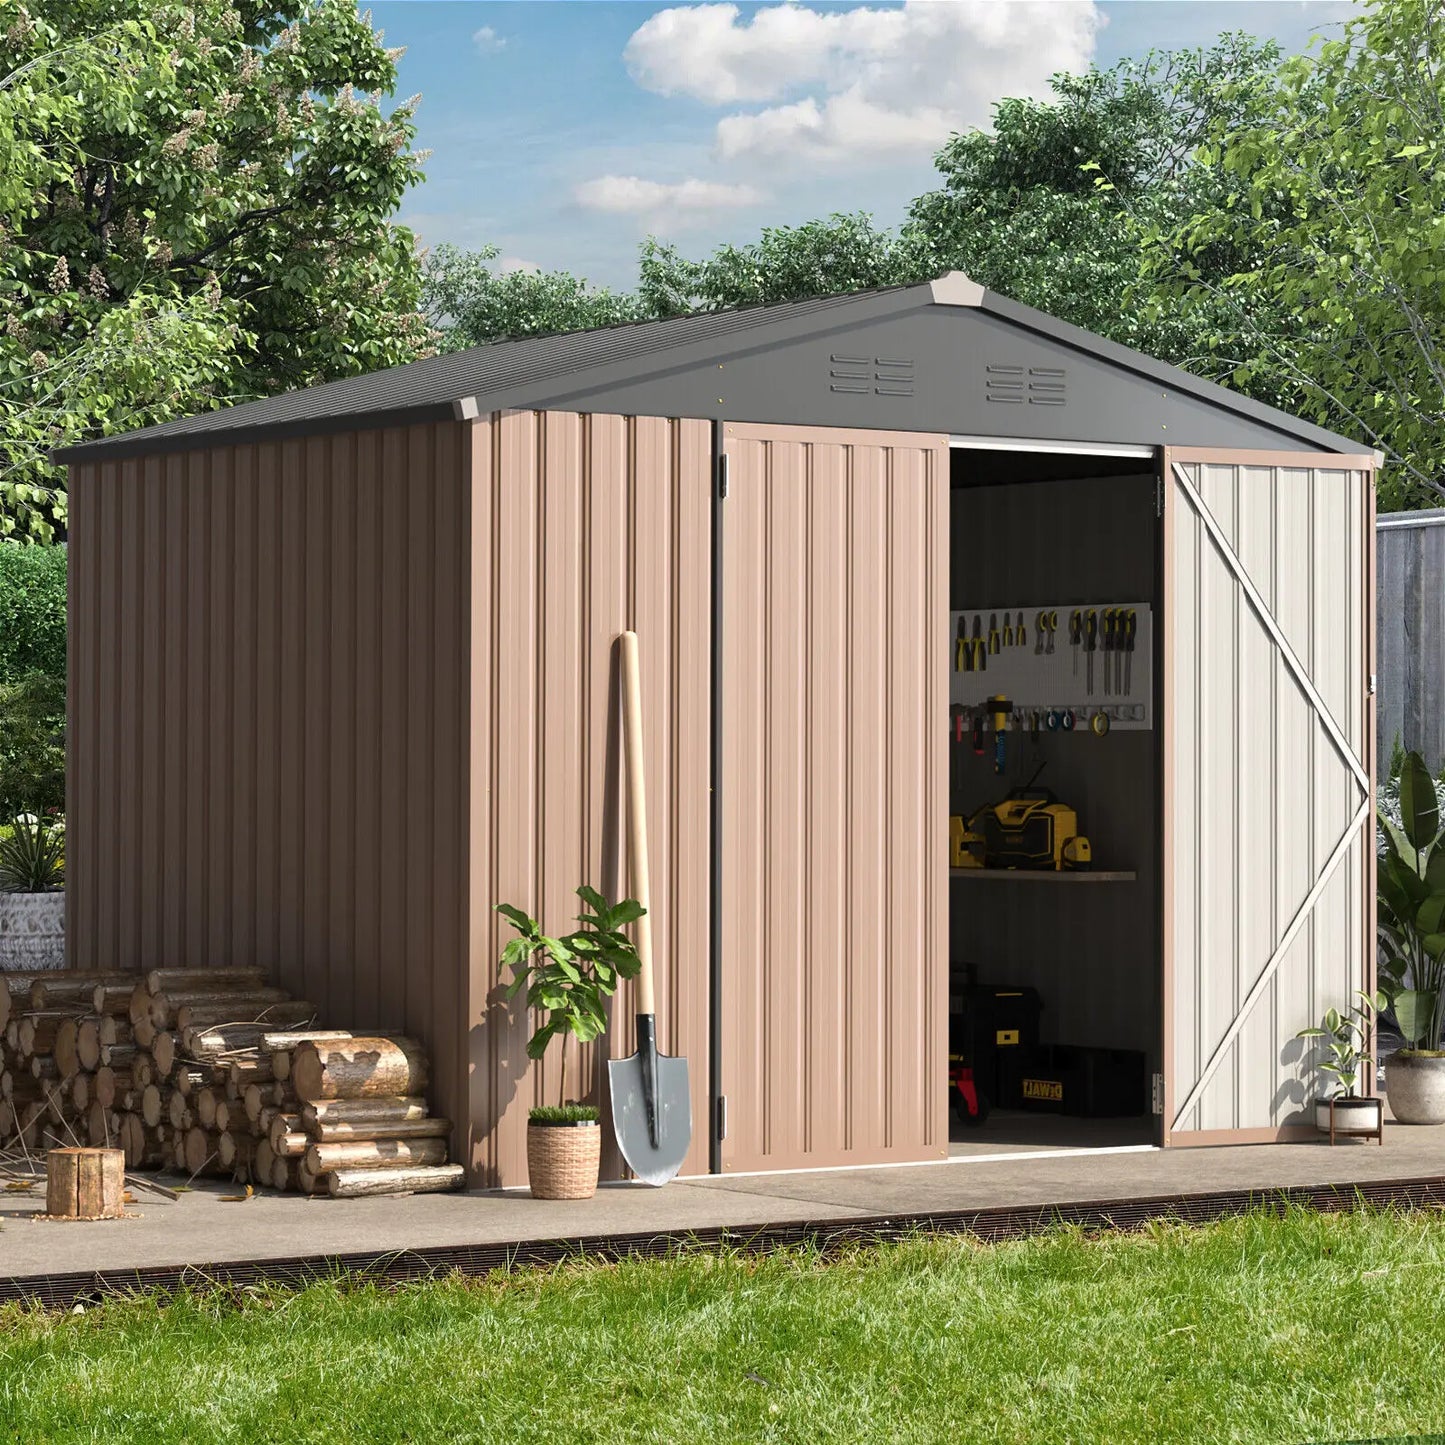 4'x6' Outdoor Metal Storage Shed for Garden Tools